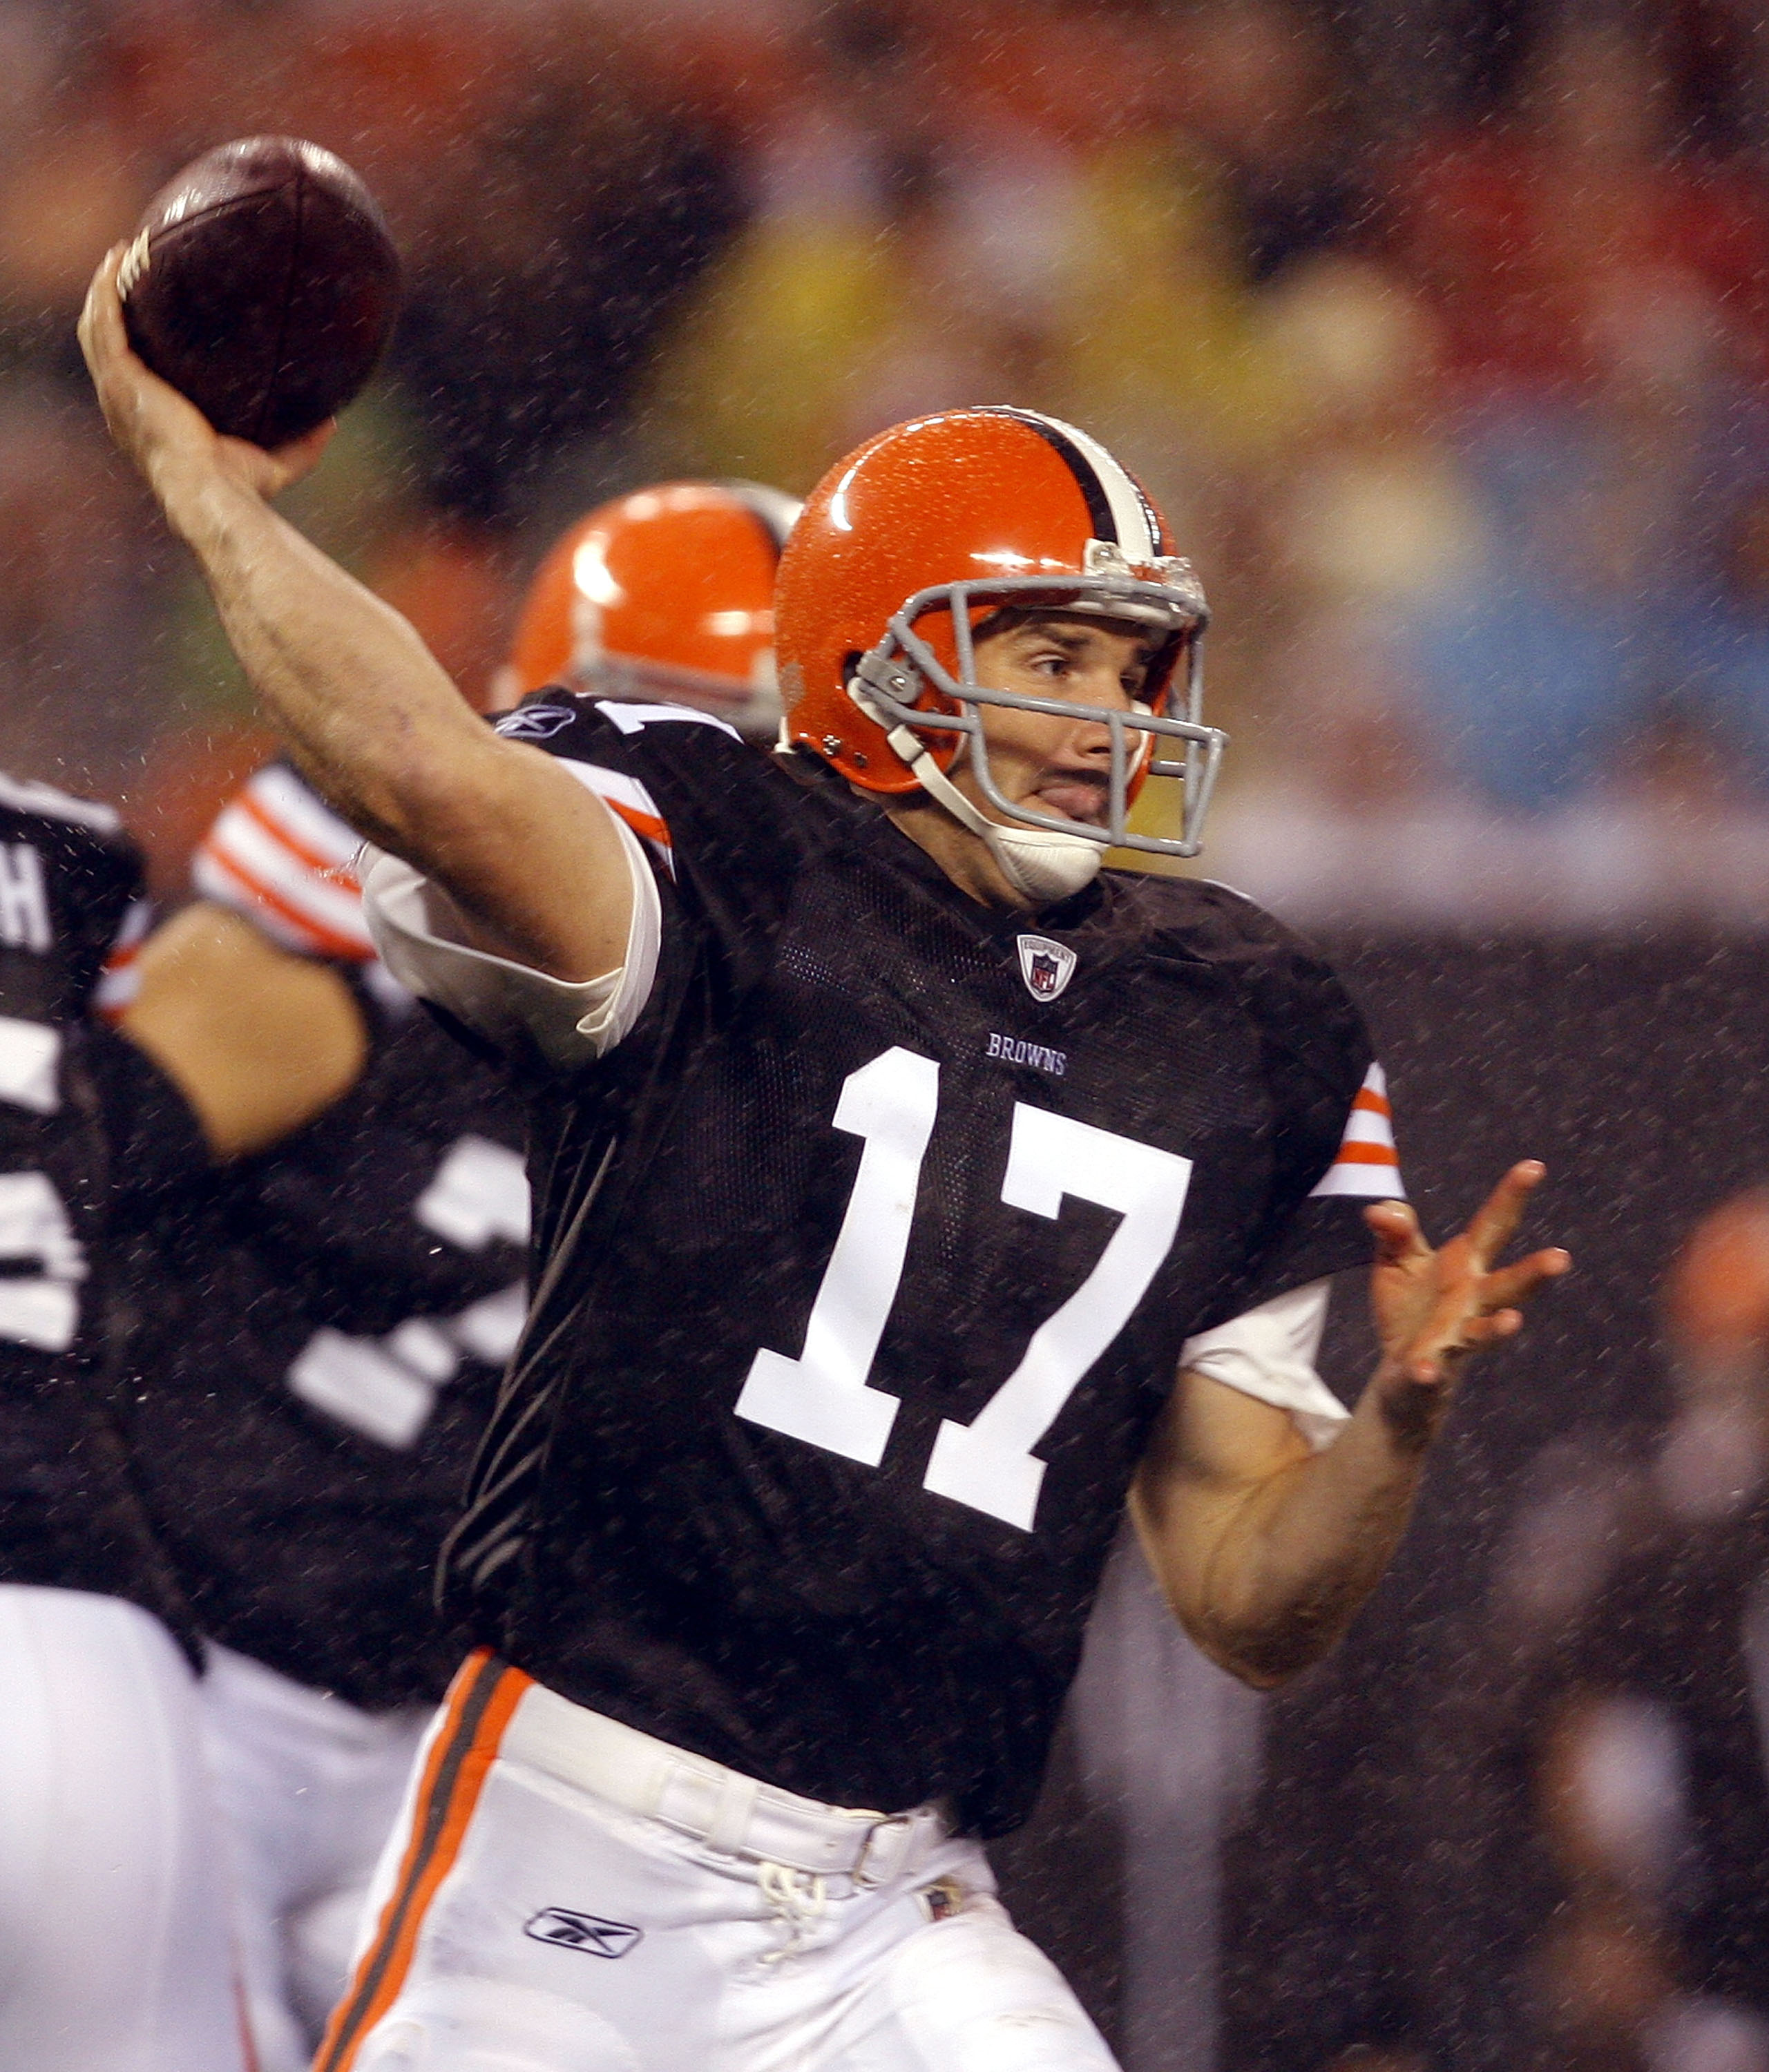 CLEVELAND - AUGUST 21:  Jake Delhomme #17 of the Cleveland Browns throws to a receiver against the St. Louis Rams at Cleveland Browns Stadium on August 21, 2010 in Cleveland, Ohio.  (Photo by Matt Sullivan/Getty Images)